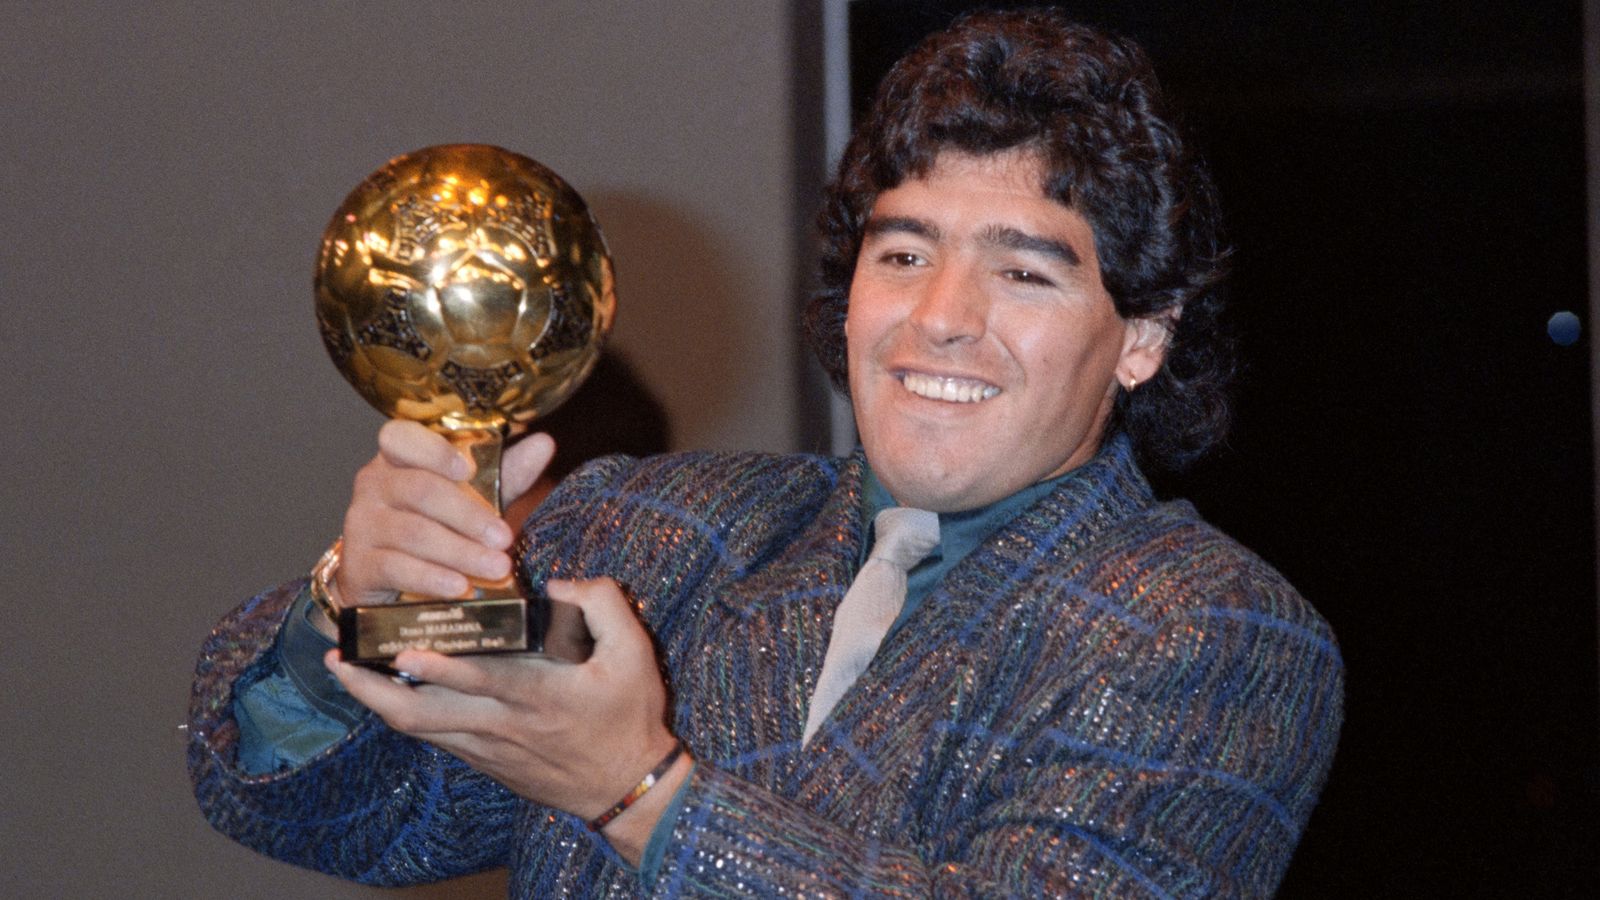 Maradona trophy that mysteriously disappeared resurfaces - and is set to be sold